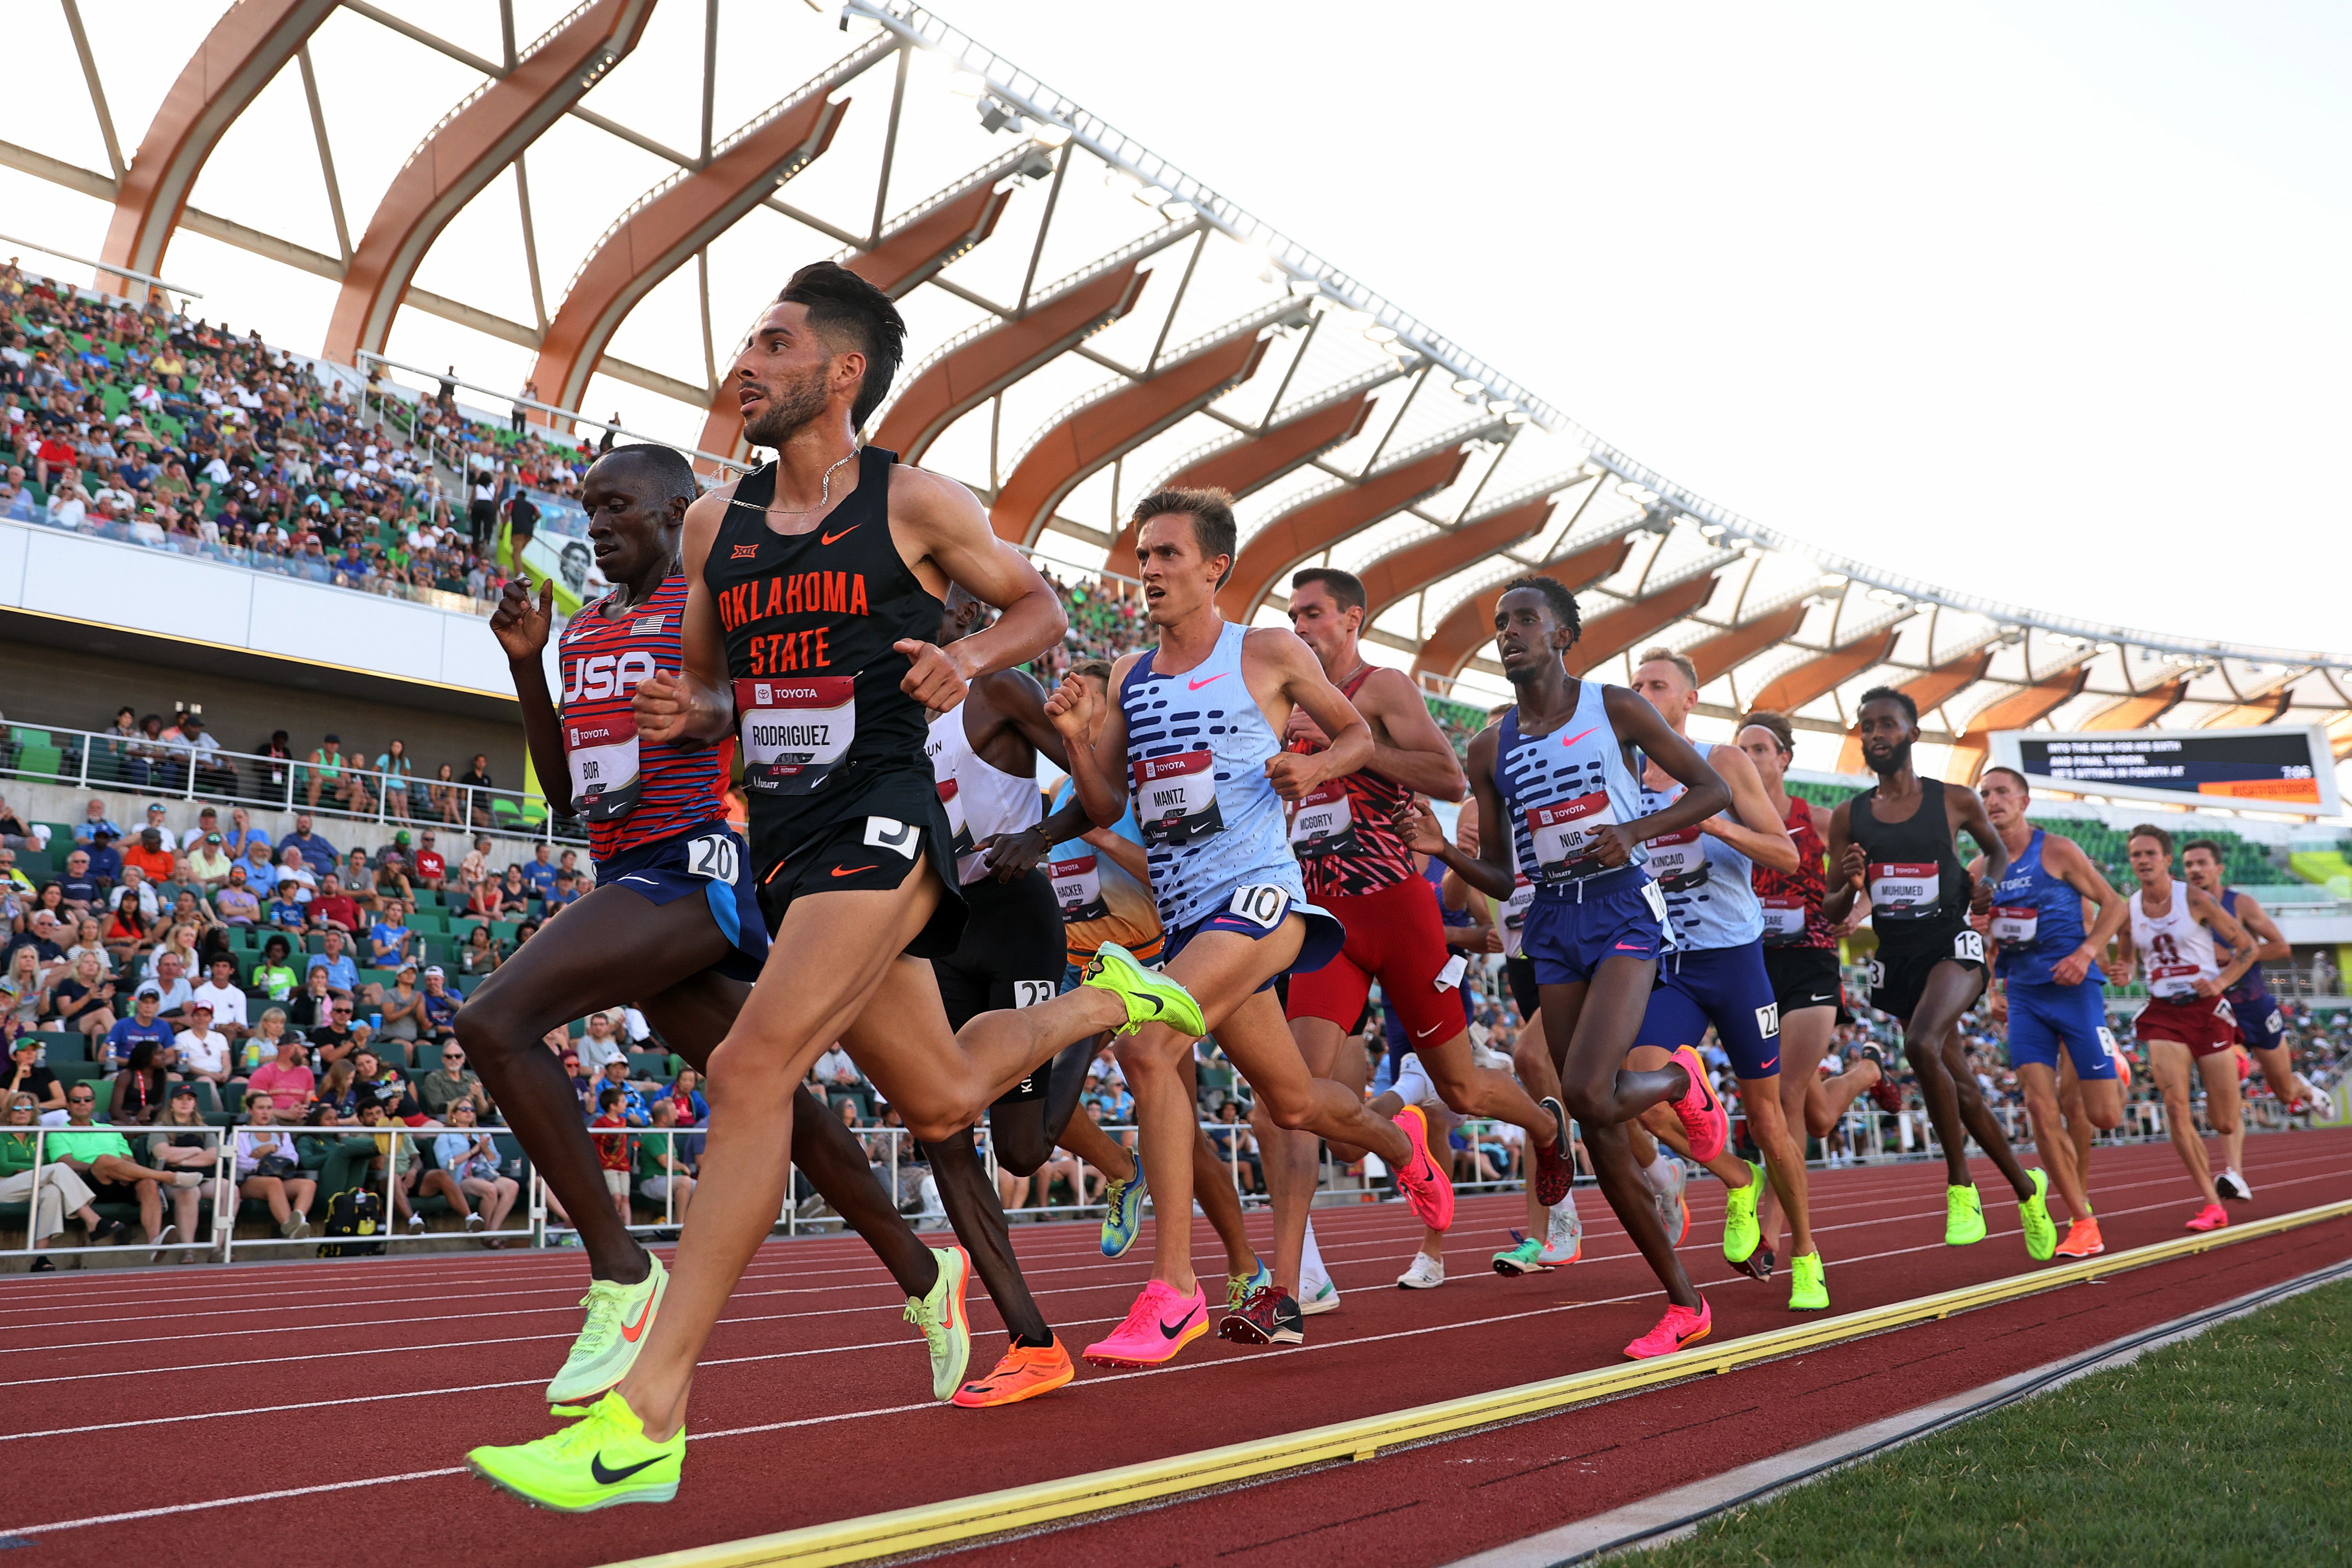 Isai Rodriguez Leads The Field In The Mens 5000m Final News Photo 1688959622 